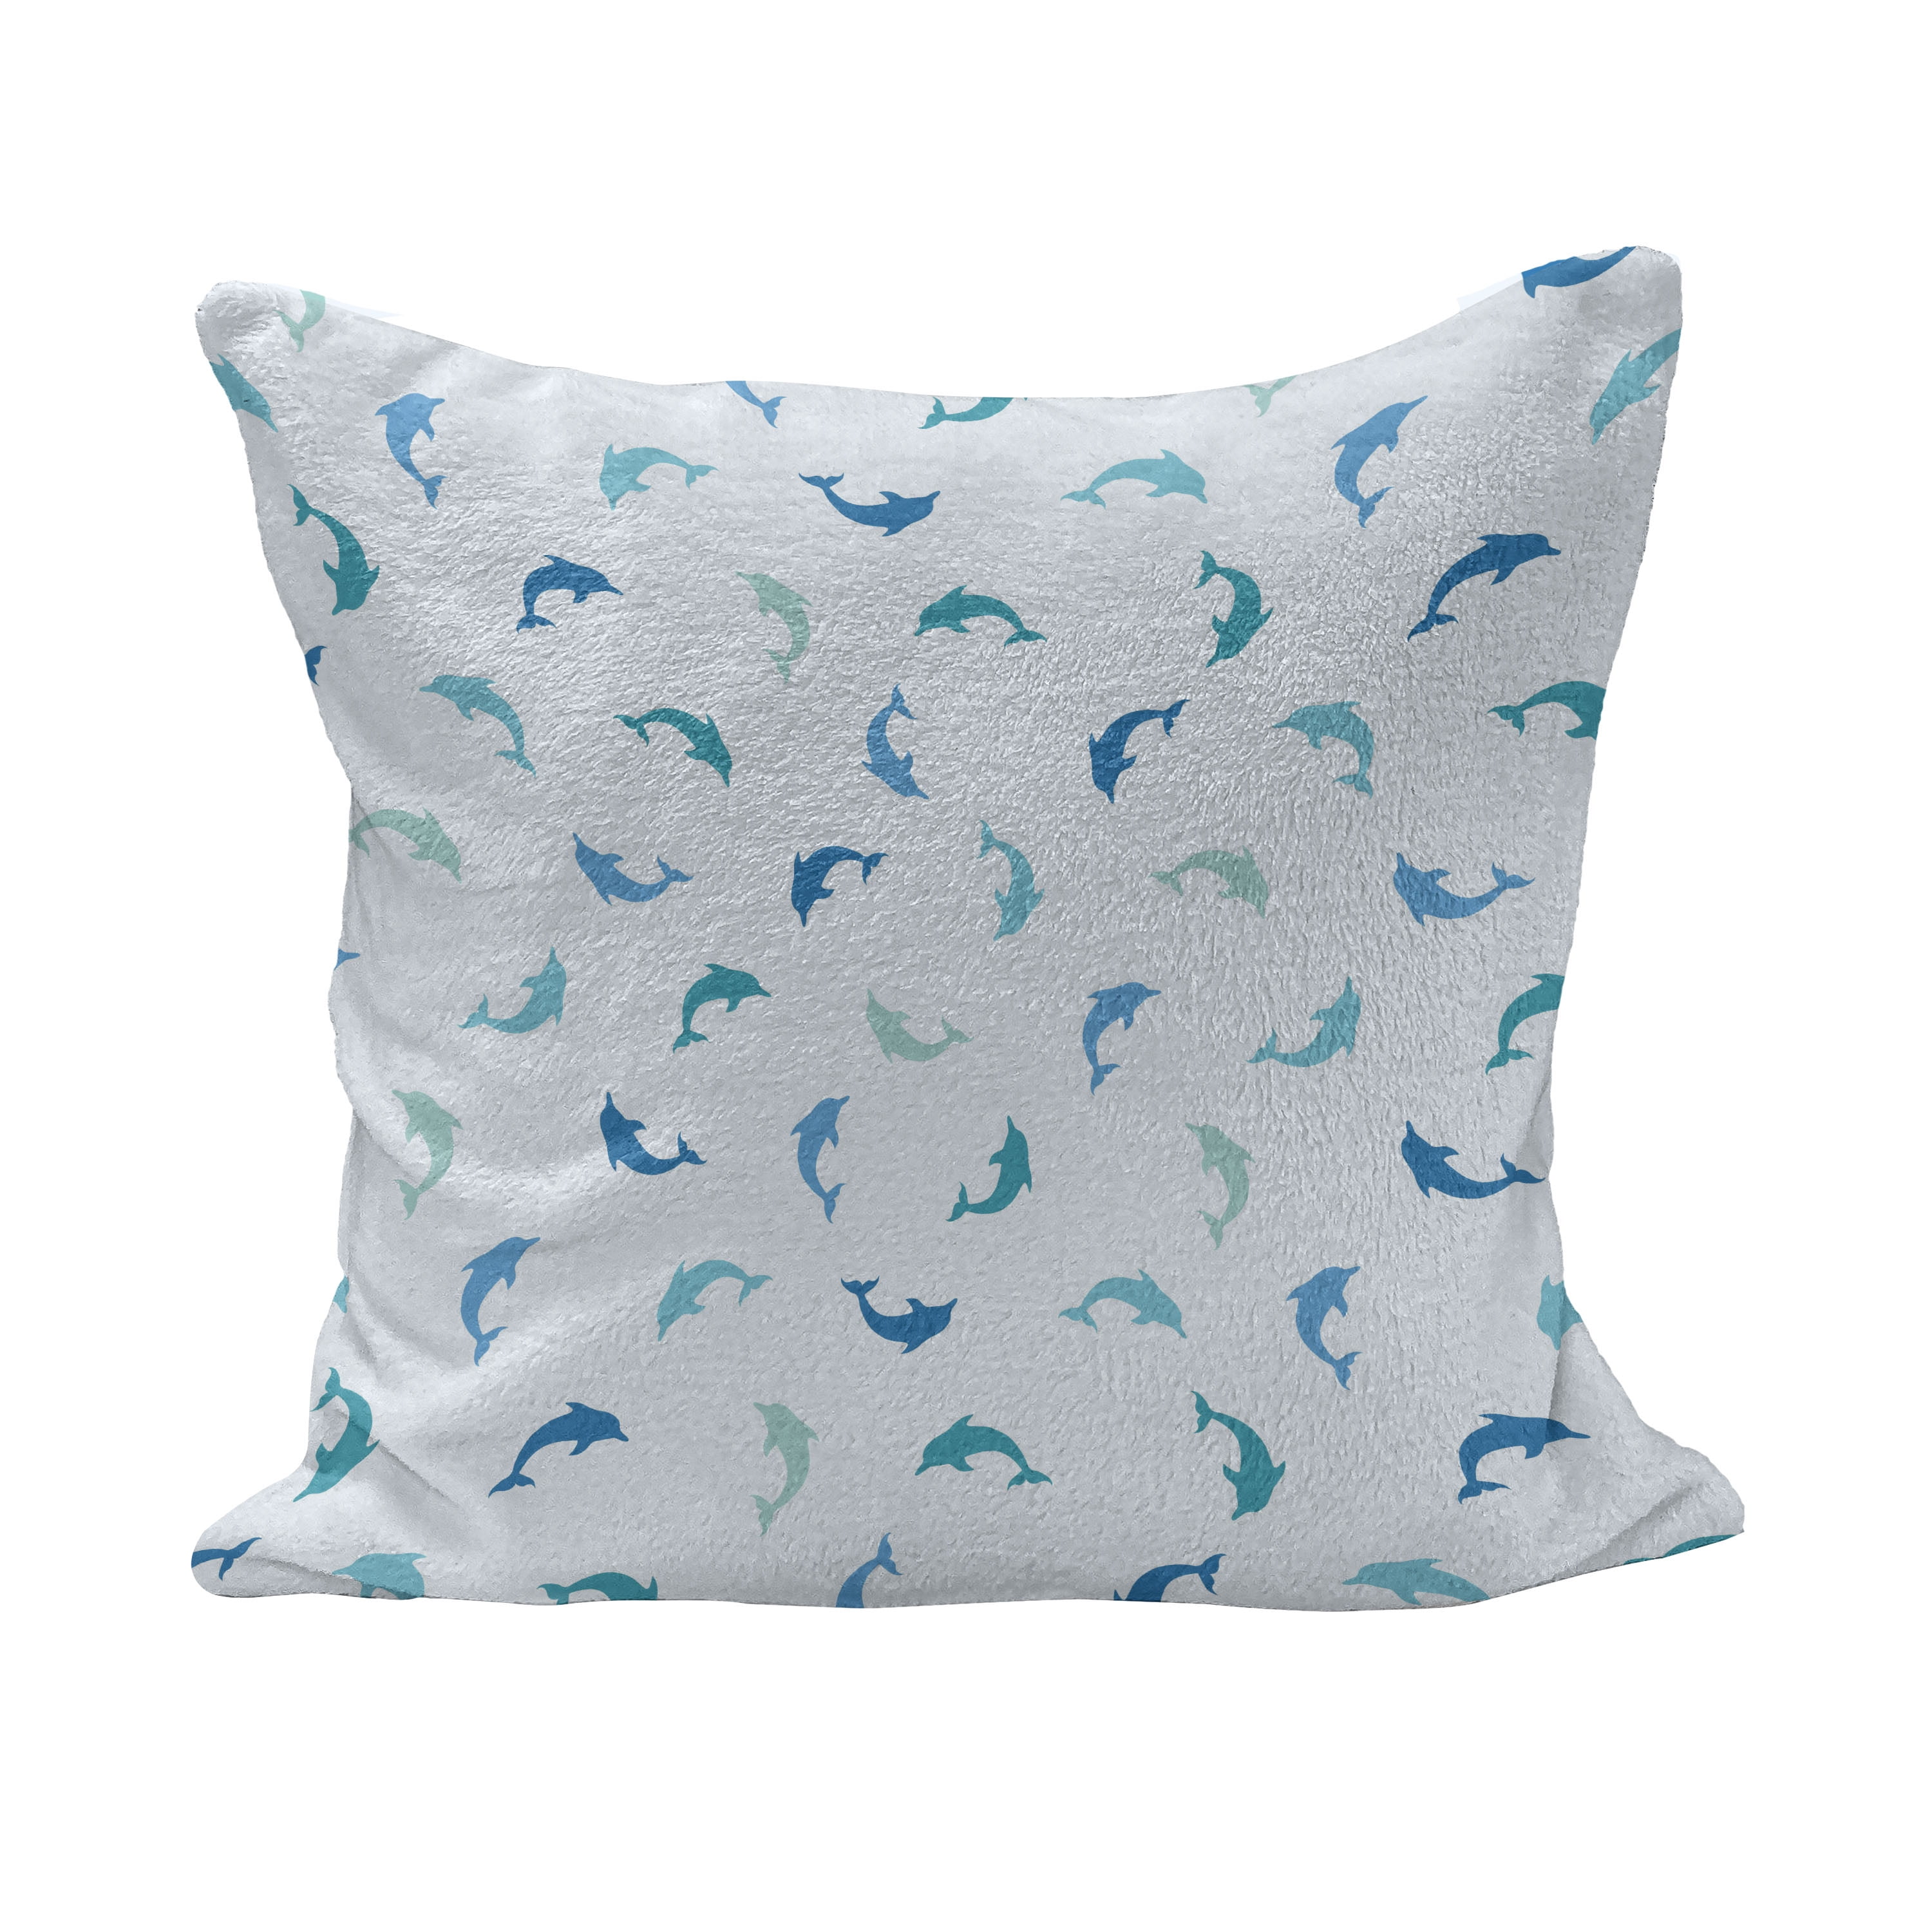 Fishes Cushion Cover Dolphins Tortoises Blue Printed Fabric Square 16" 18" 